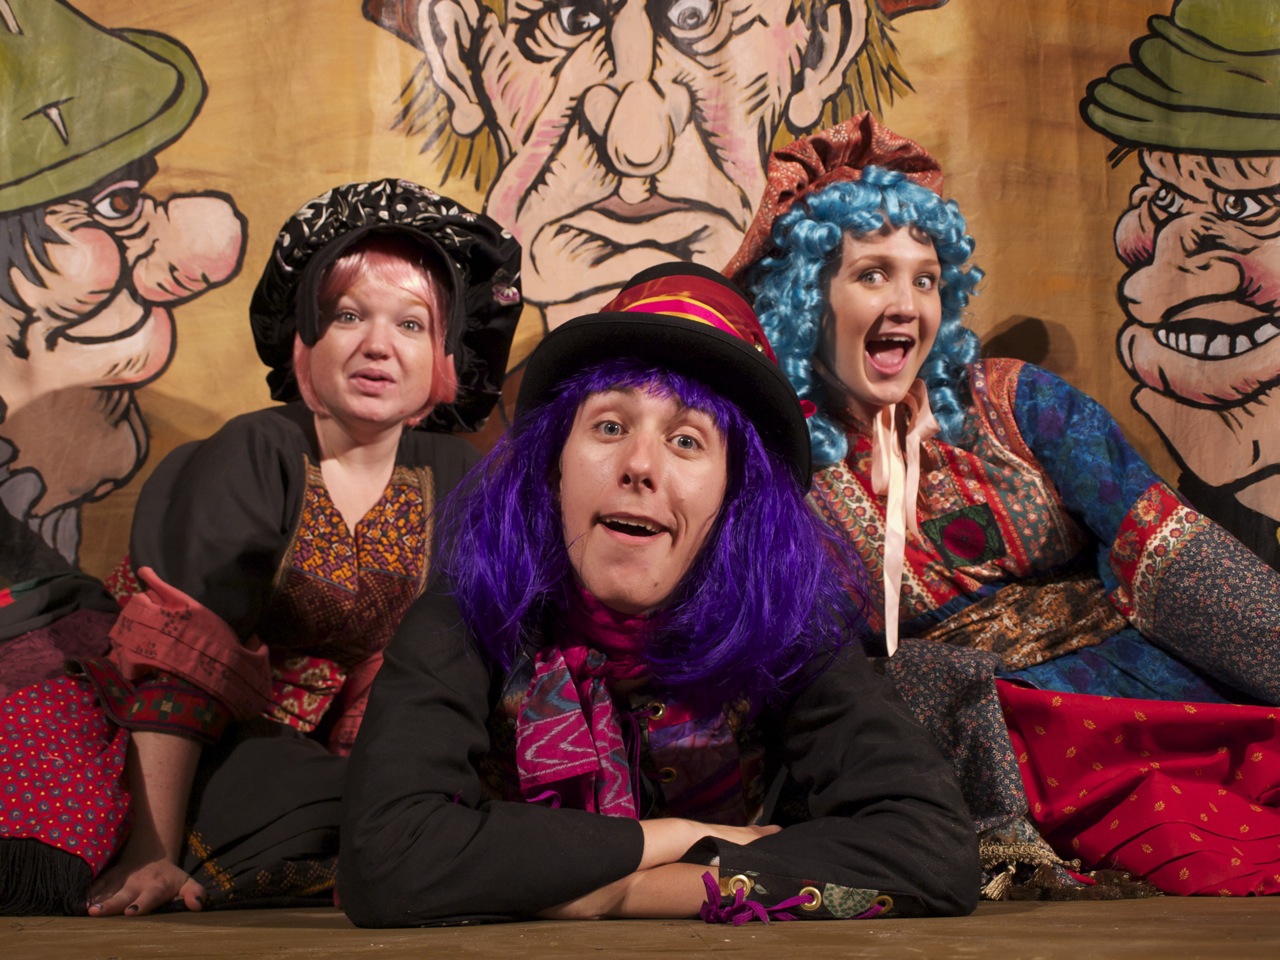 THE MERRYWINKLE INTERNATIONAL TROUPE OF VAGABONDS PERFORMS A DELICIOUS POTPOURRI OF FANTASTICAL FAIRY TALES AND ASTONISHING FOLK LEGENDS